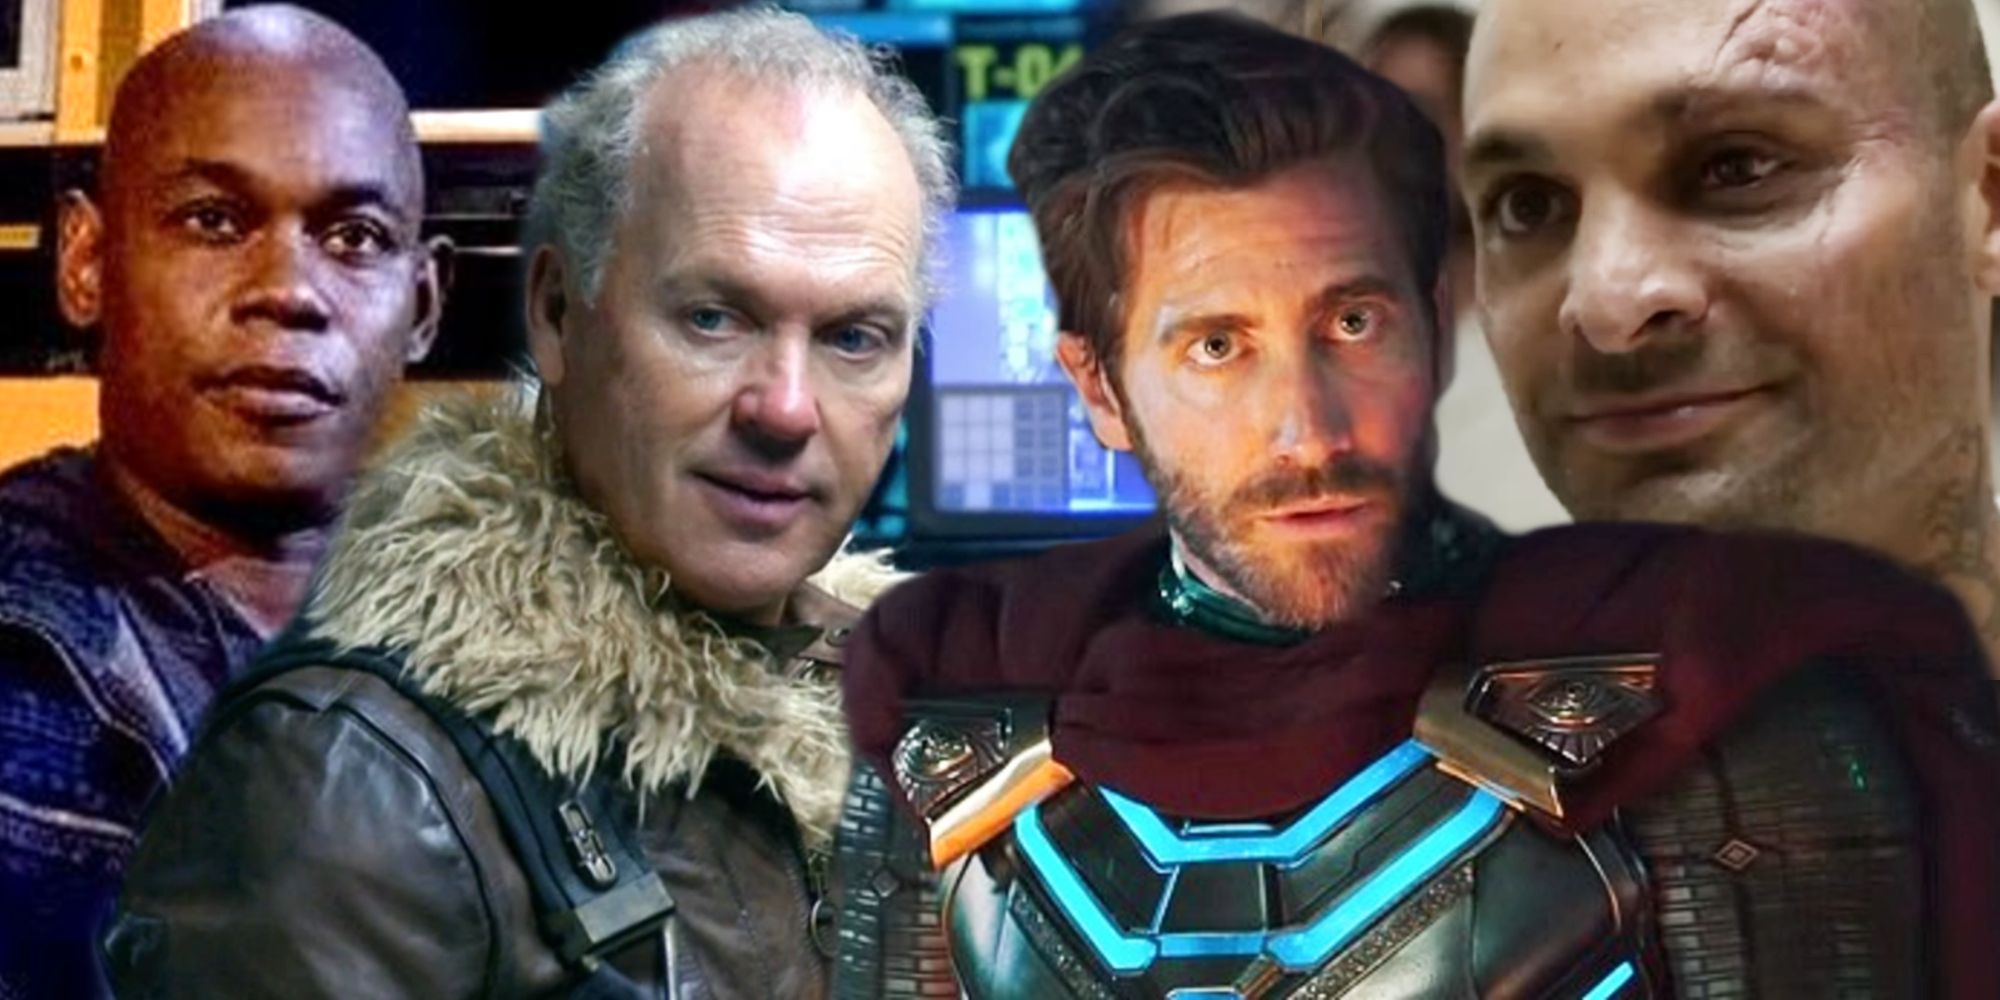 Mysterio, Vulture, Scorpion, and Shocker in the MCU Spider-Man Movies